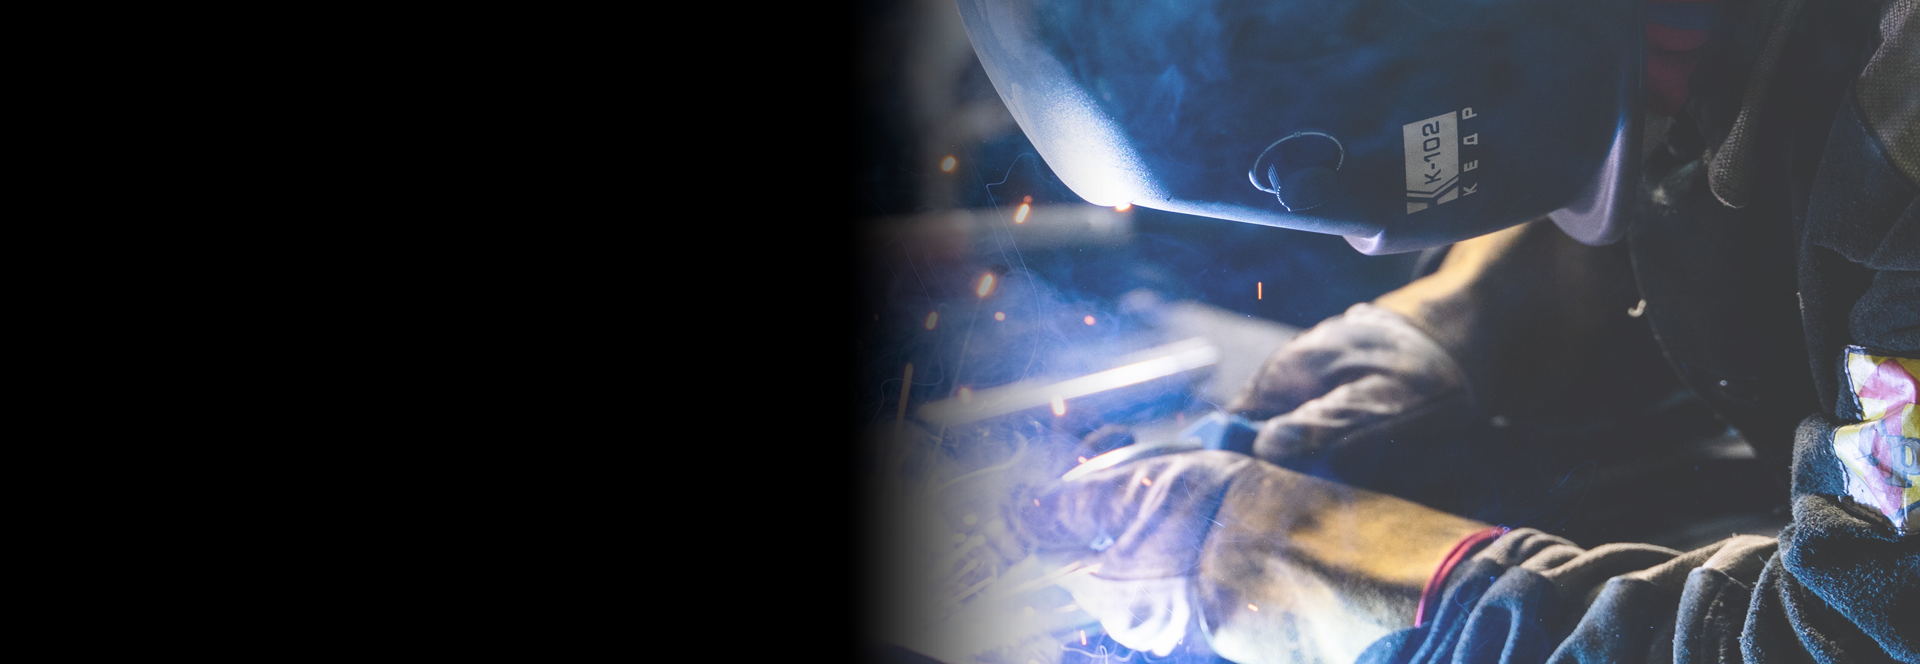 welding and manufacturing services for edmonton and surrounding areas